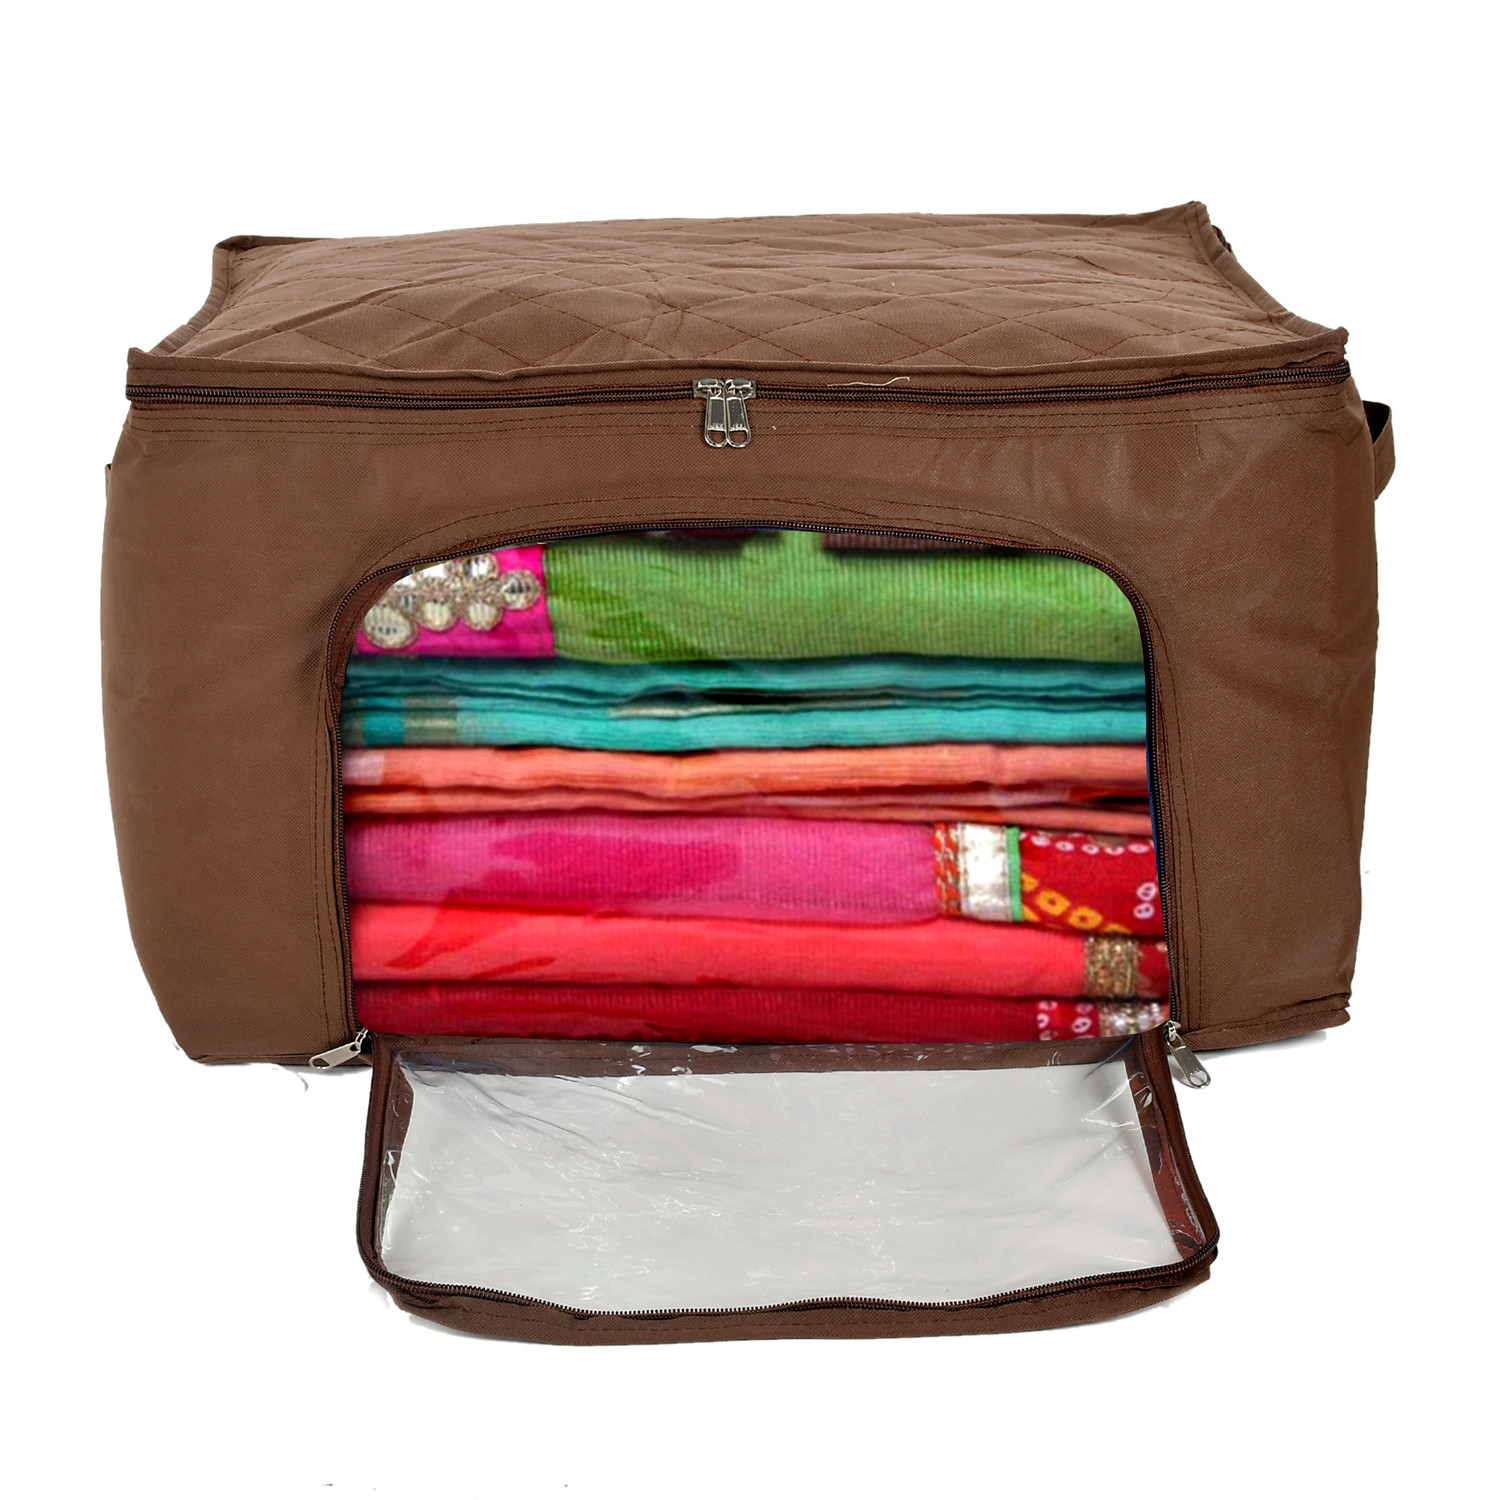 Kuber Industries Clothing Storage Bags, Under Bed Foldable Organizer, Store Blankets, Clothes With Zipper Tranasparent Window, 66 Litre (Brown)-HS_38_KUBMART21297